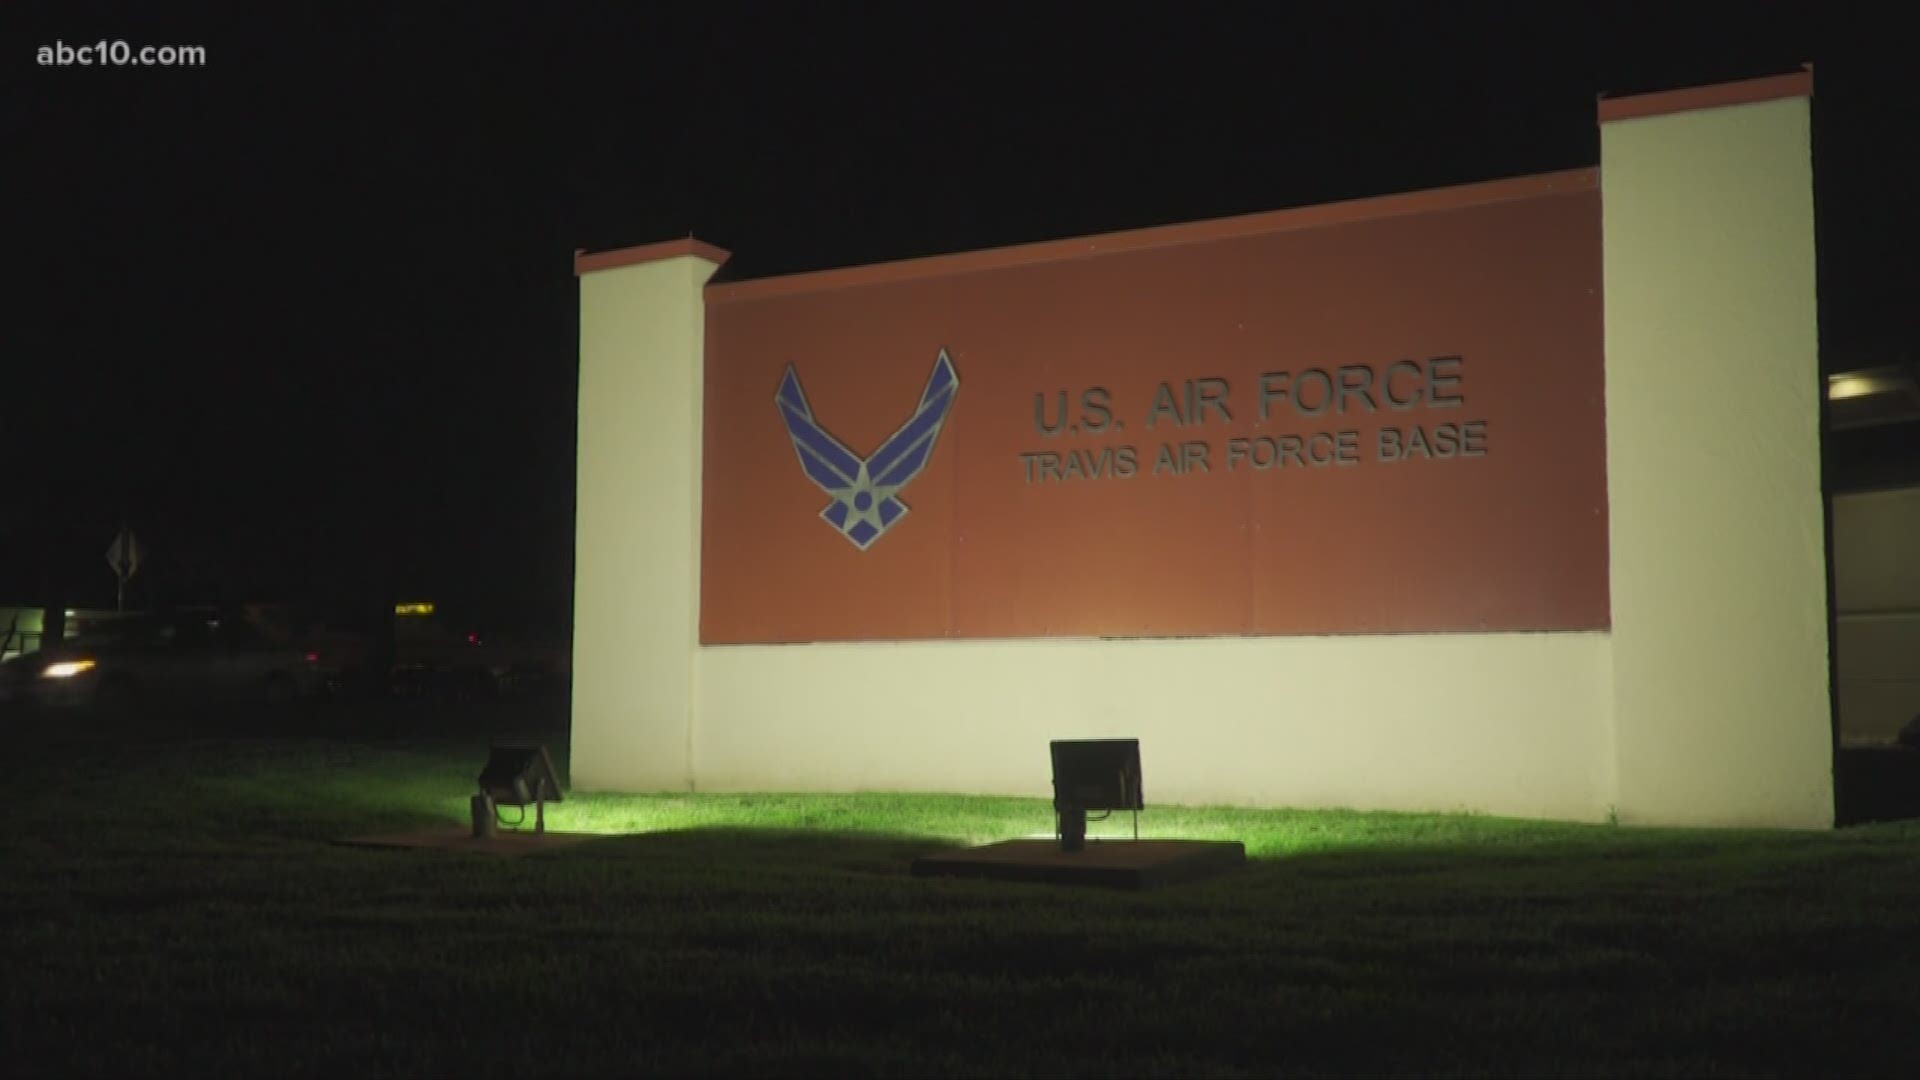 On Tuesday, several people evacuated from China and quarantined at Travis Air Force Base will finally be allowed to leave.